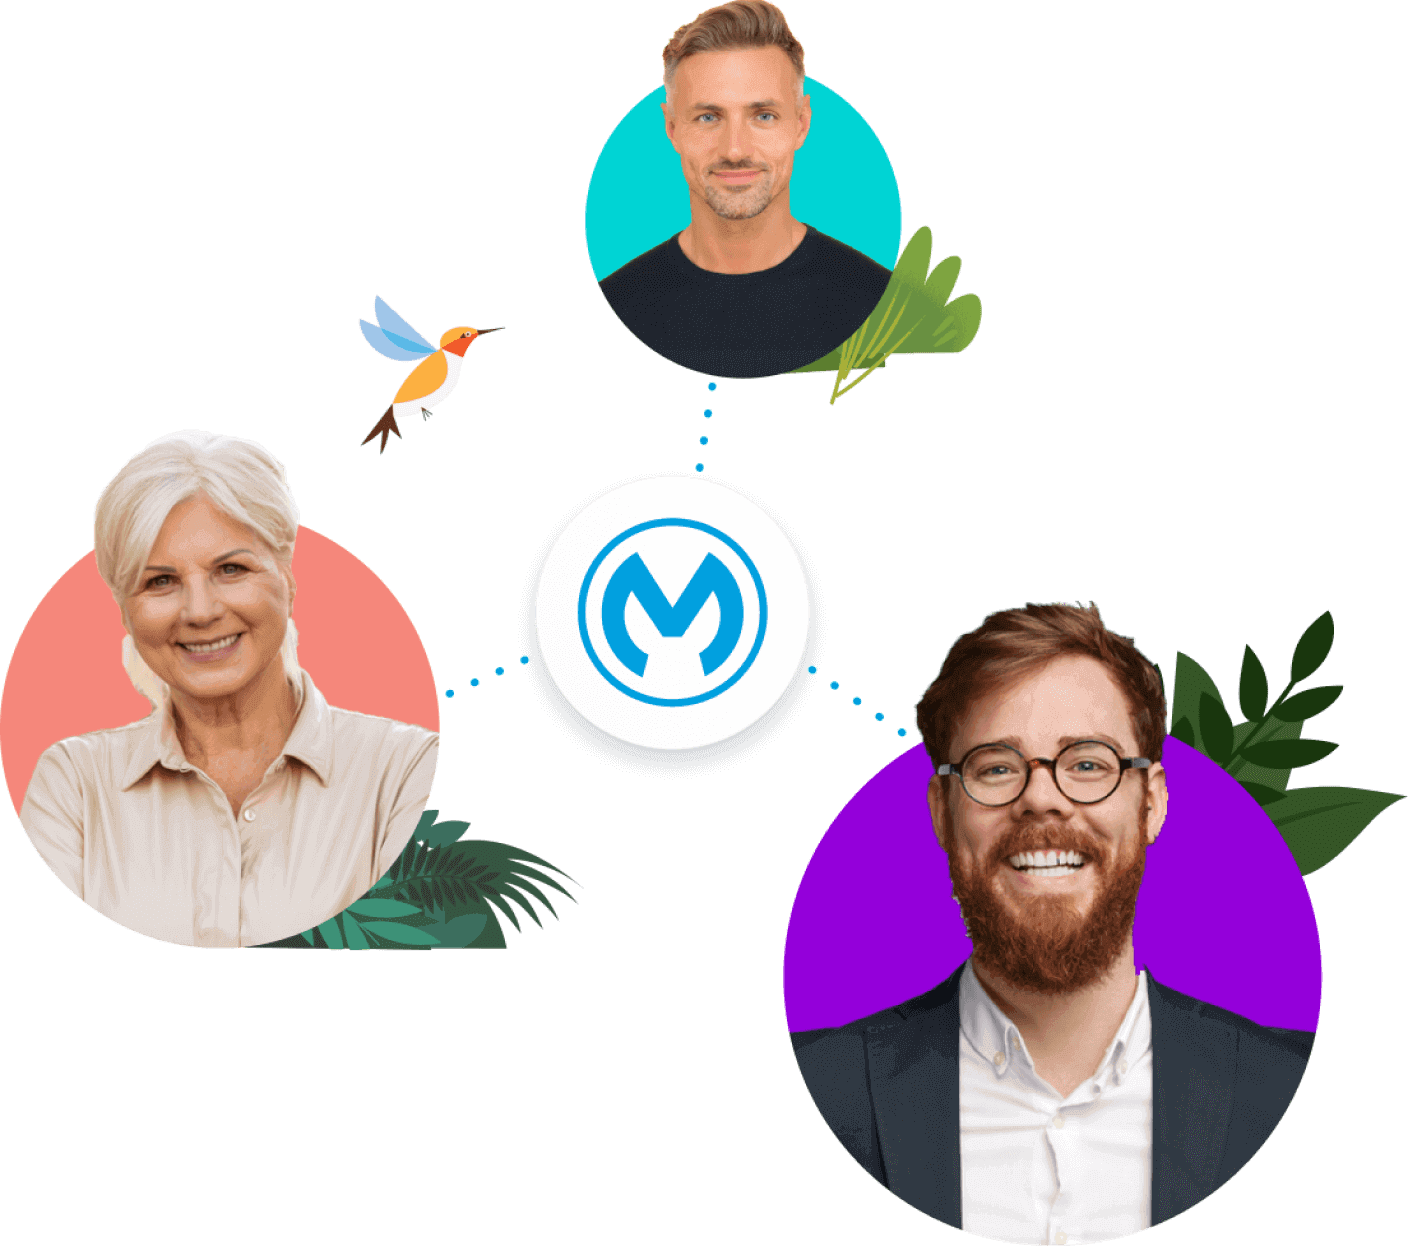 MuleSoft financial services solutions helps unlock core systems, created connected customer experiences, and unleash and scale innovation.